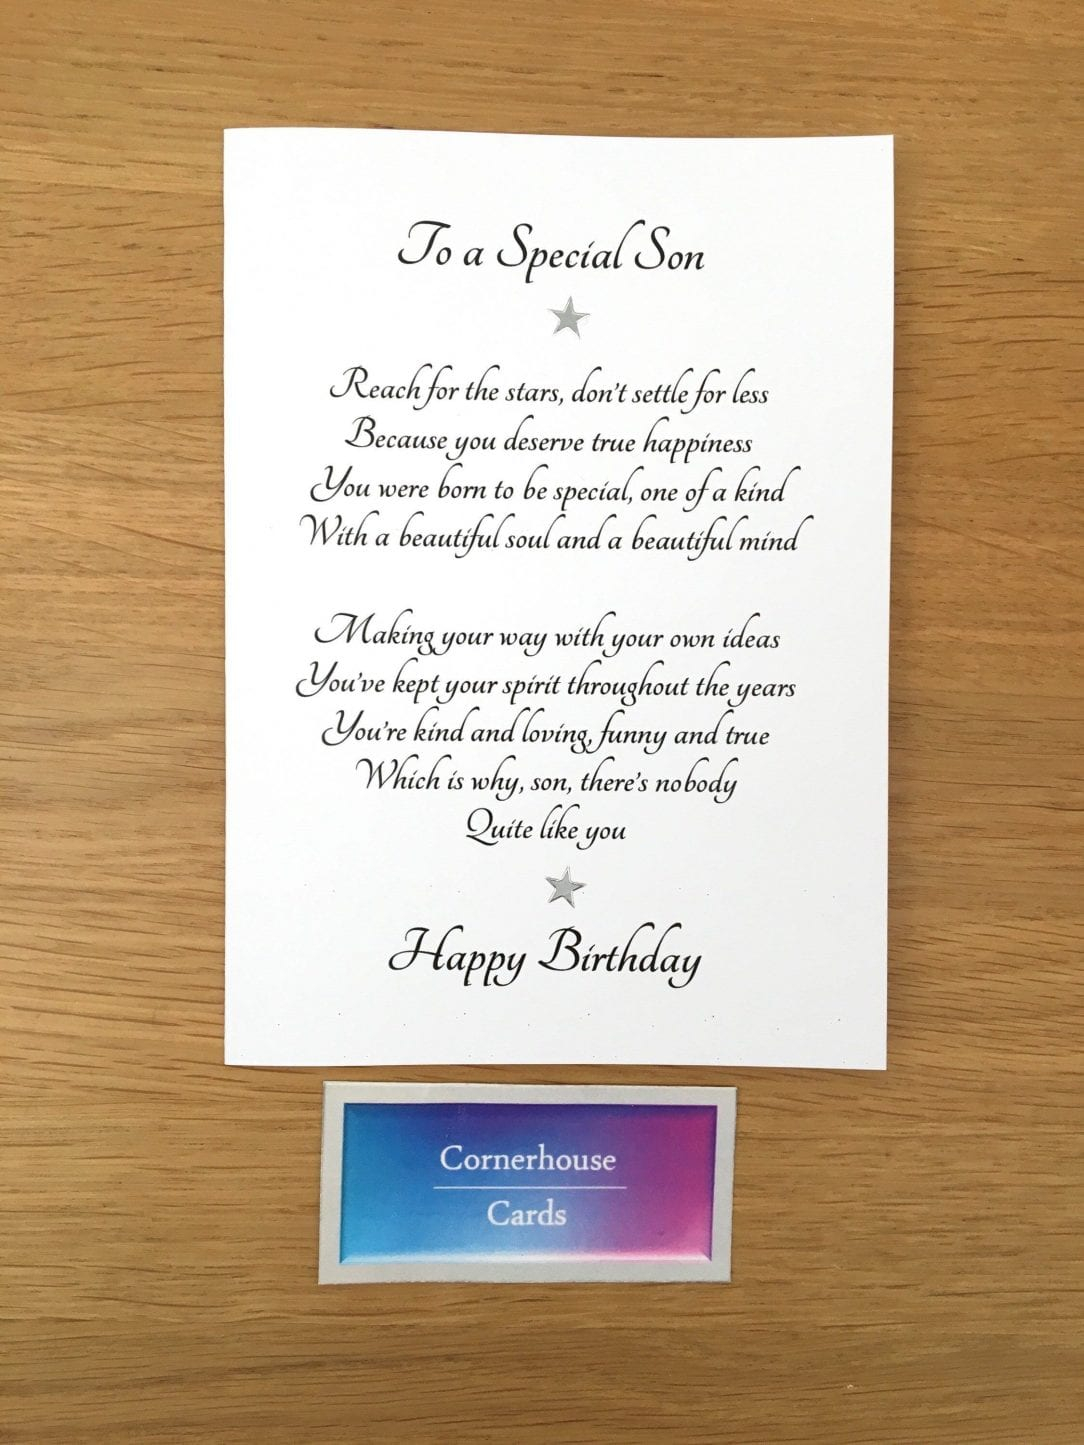 Ideas For Happy Birthday Cards Happy Birthday Card Ideas For Son Messages Your Images Wording Text